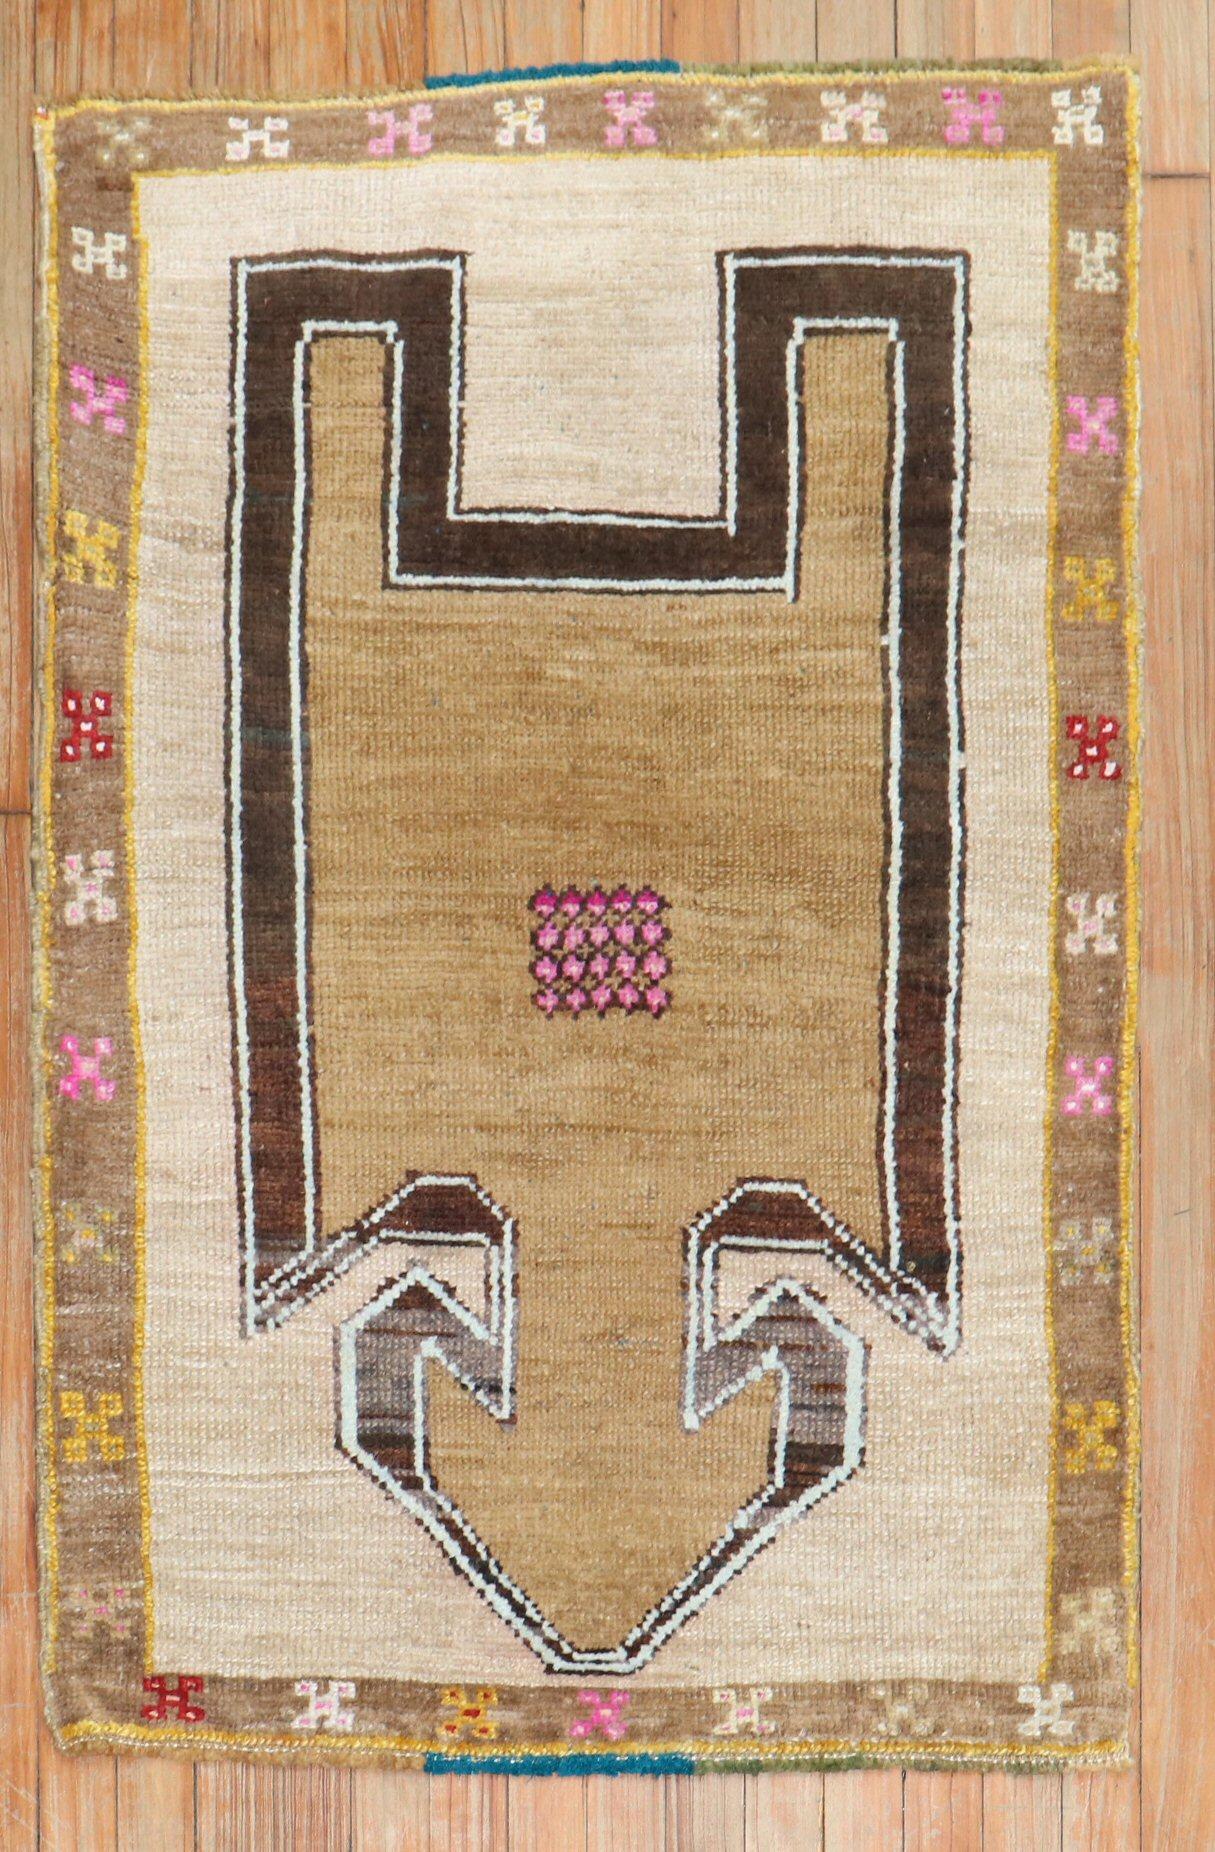 One of a kind mid-20th-century eclectic Turkish prayer Anatolian rug

Measures: 2'8